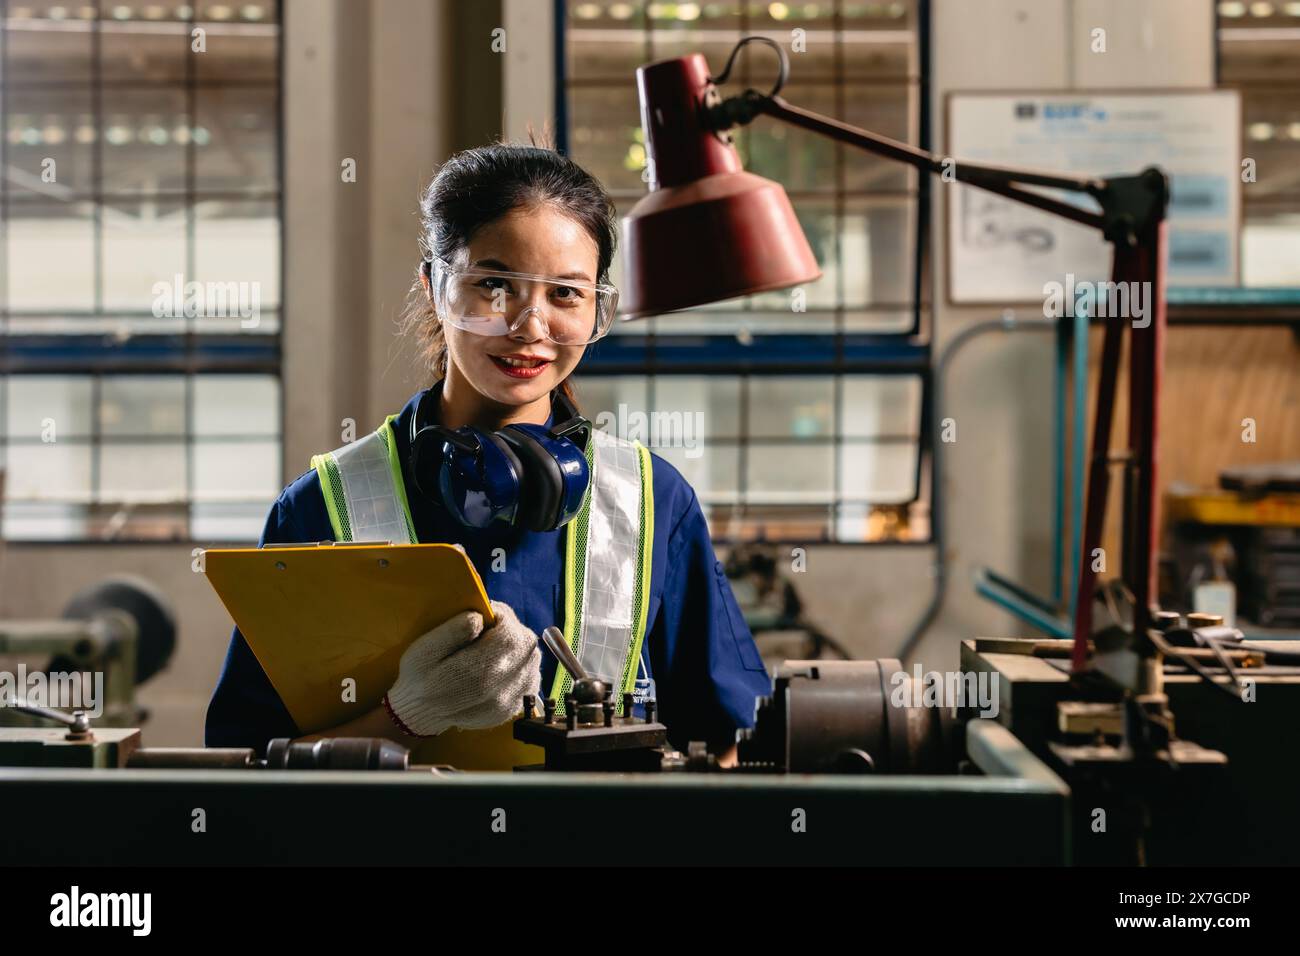 Portrait happy engineer worker with safety eyes protection glasses professional working with metal lathe milling machine heavy industry factory. Stock Photo